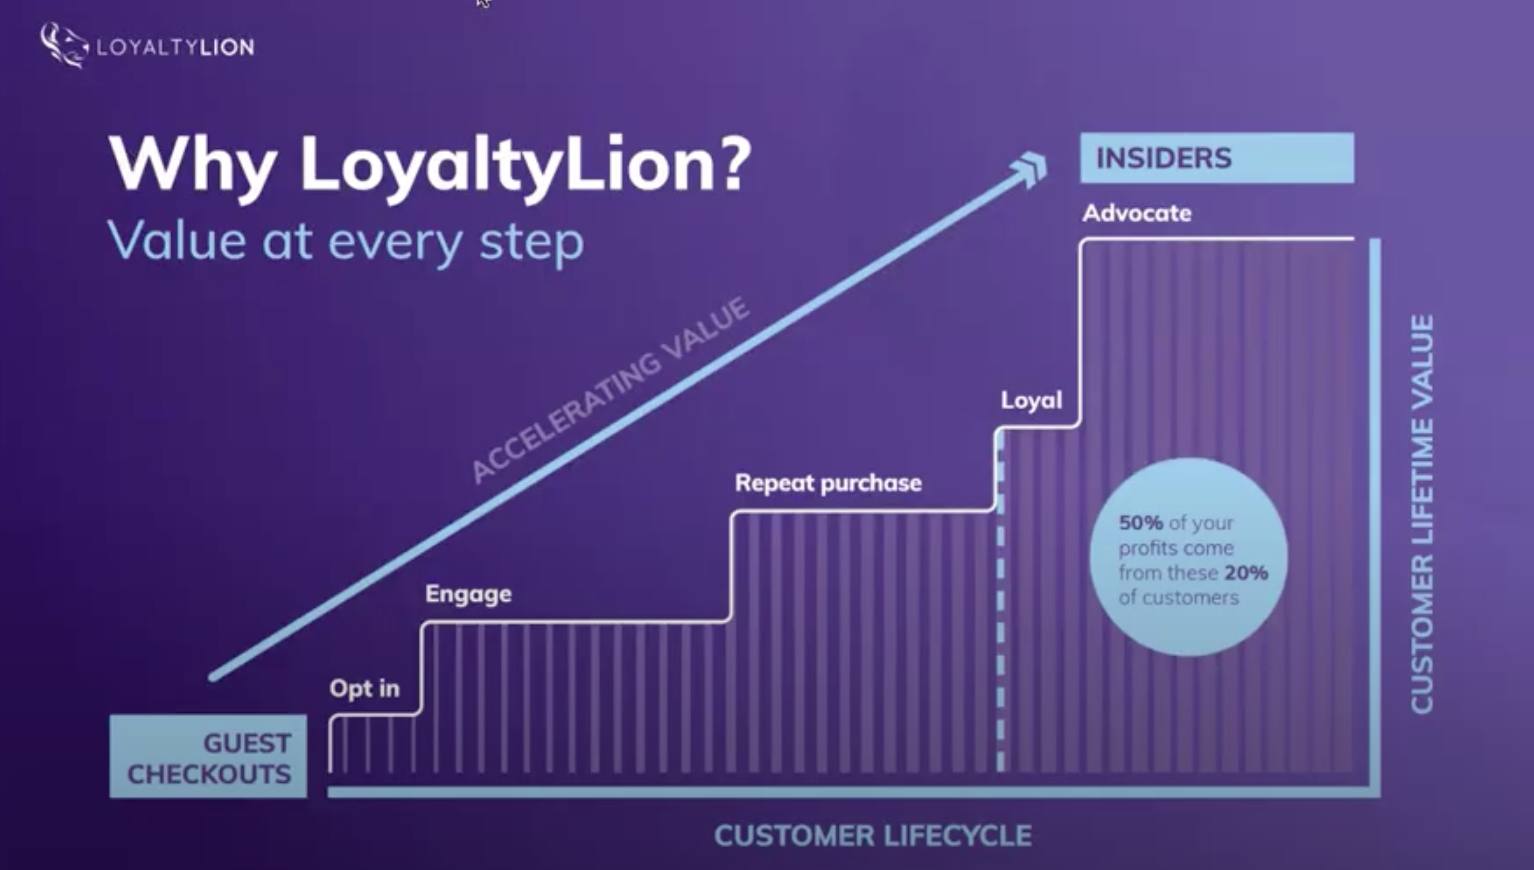 brand loyalty with Loyalty Lion